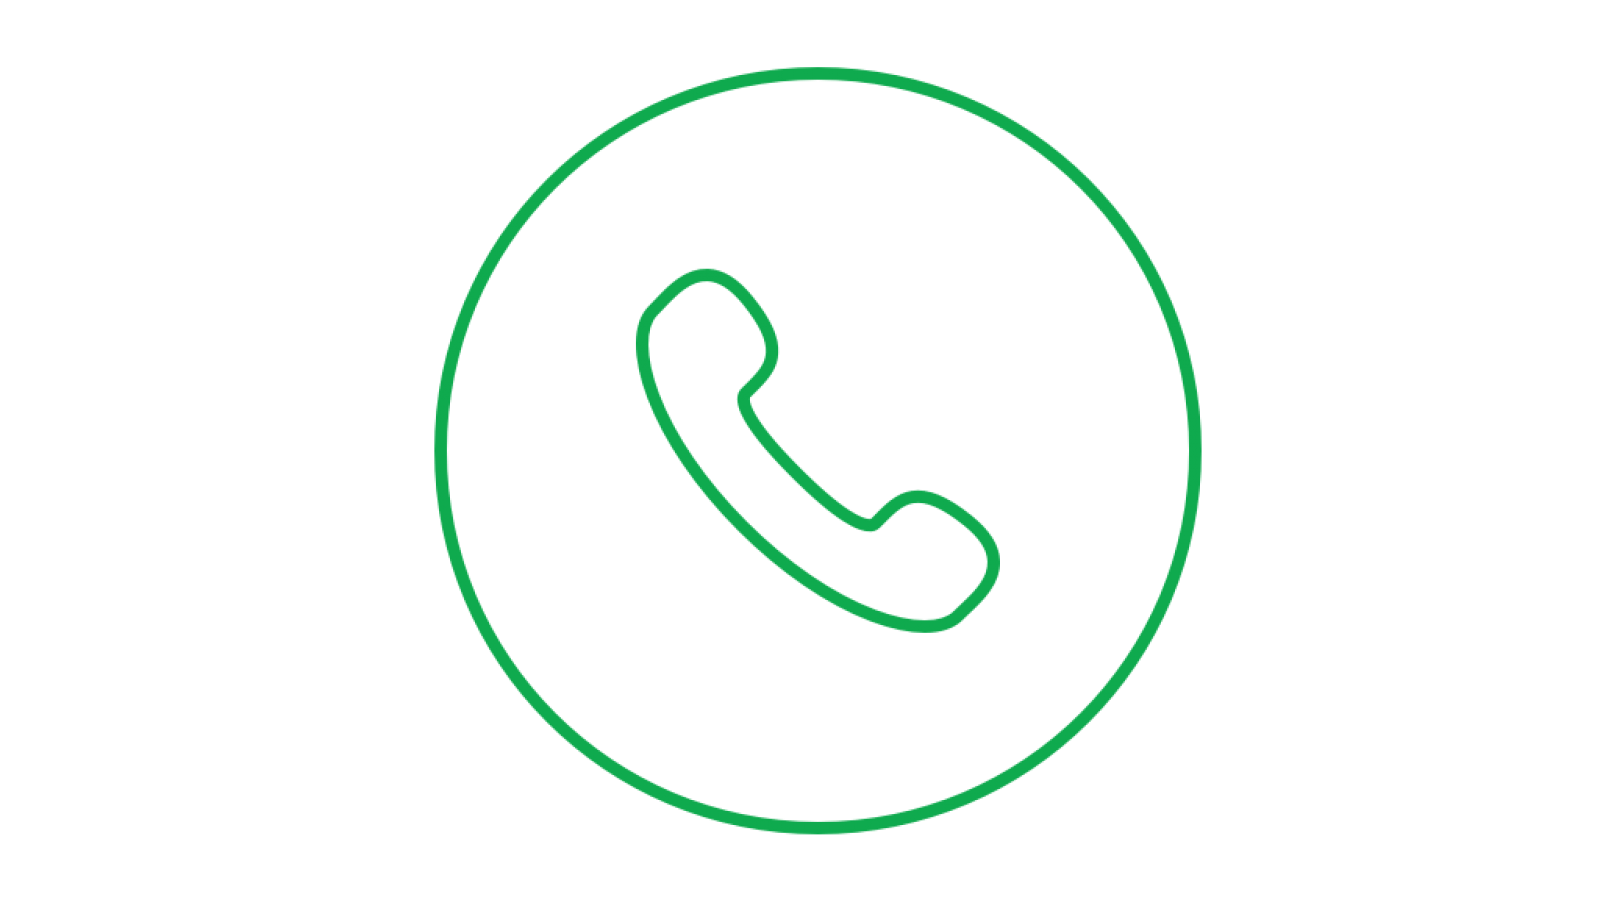 telephone icon in a green circle